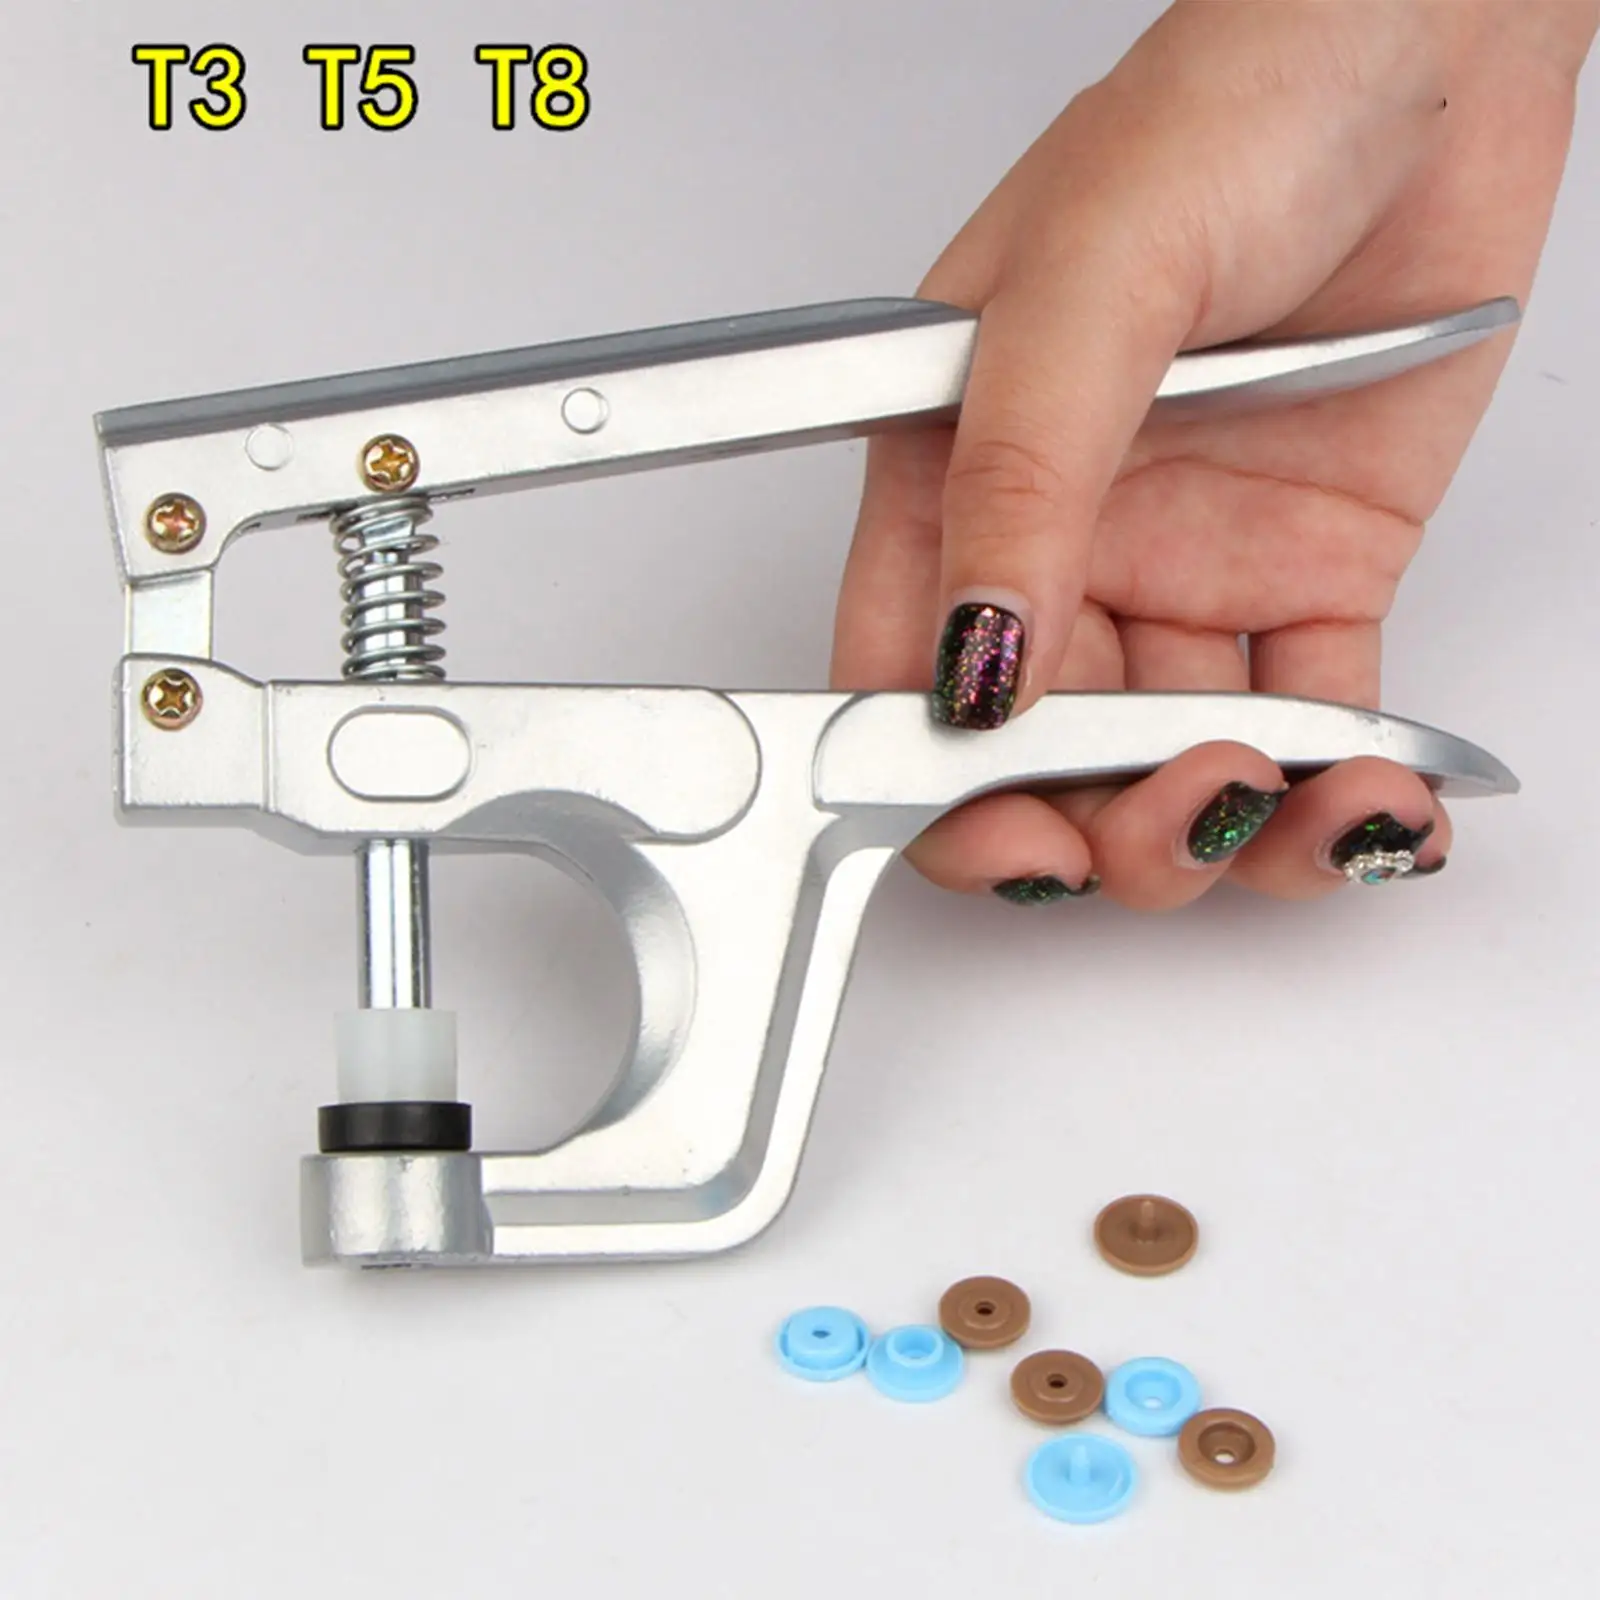 Snap Fastener Pliers for Snaps Machines Tool for Clothing